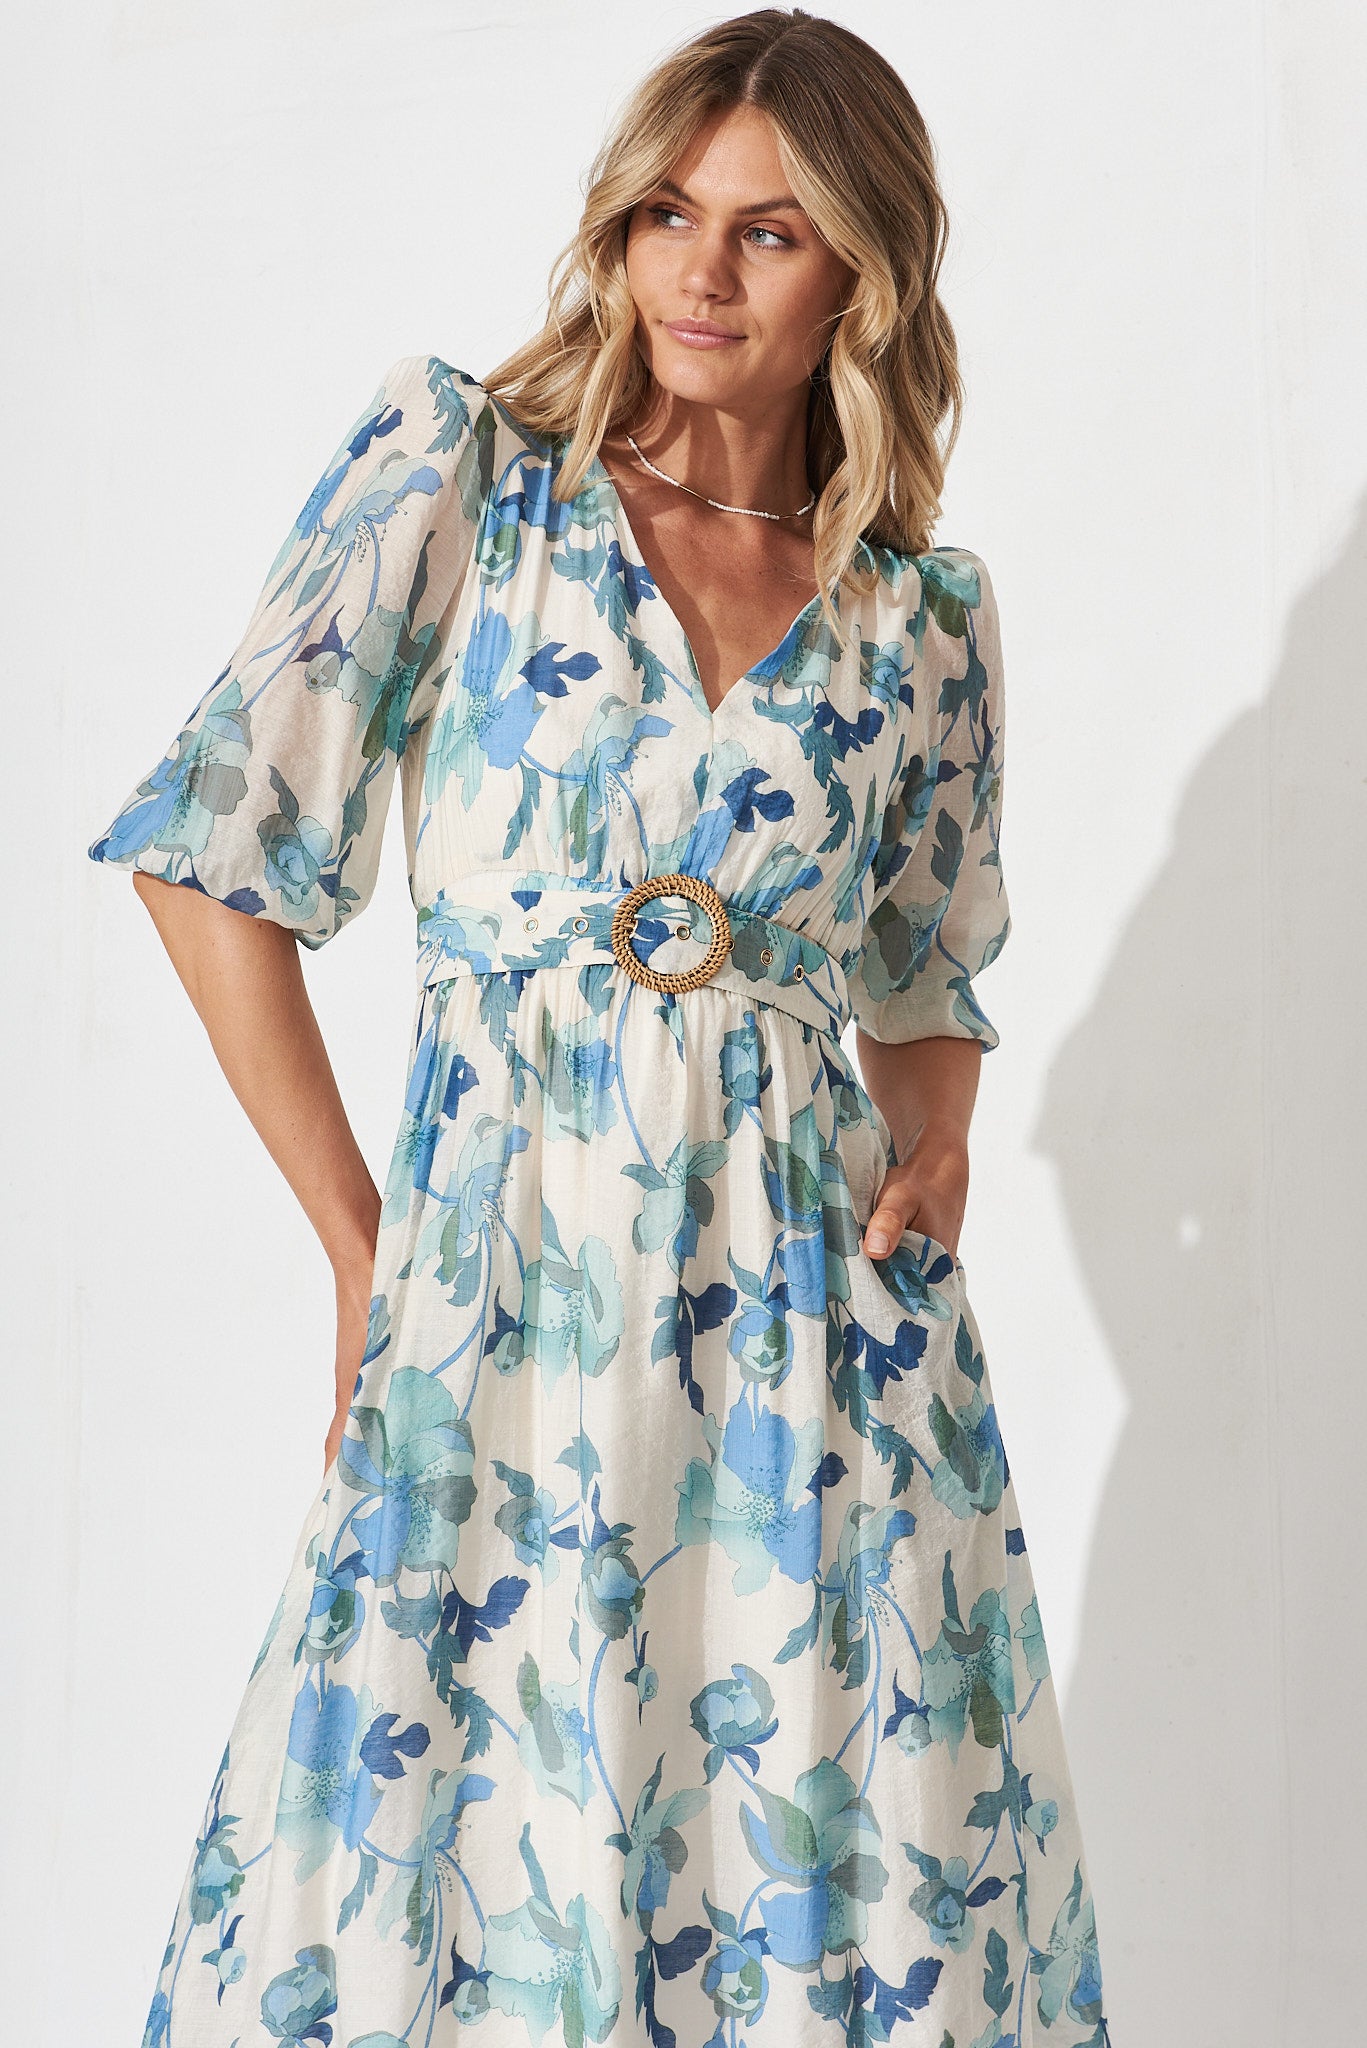 In St Floral With – Blue Adrina White Frock Maxi Dress